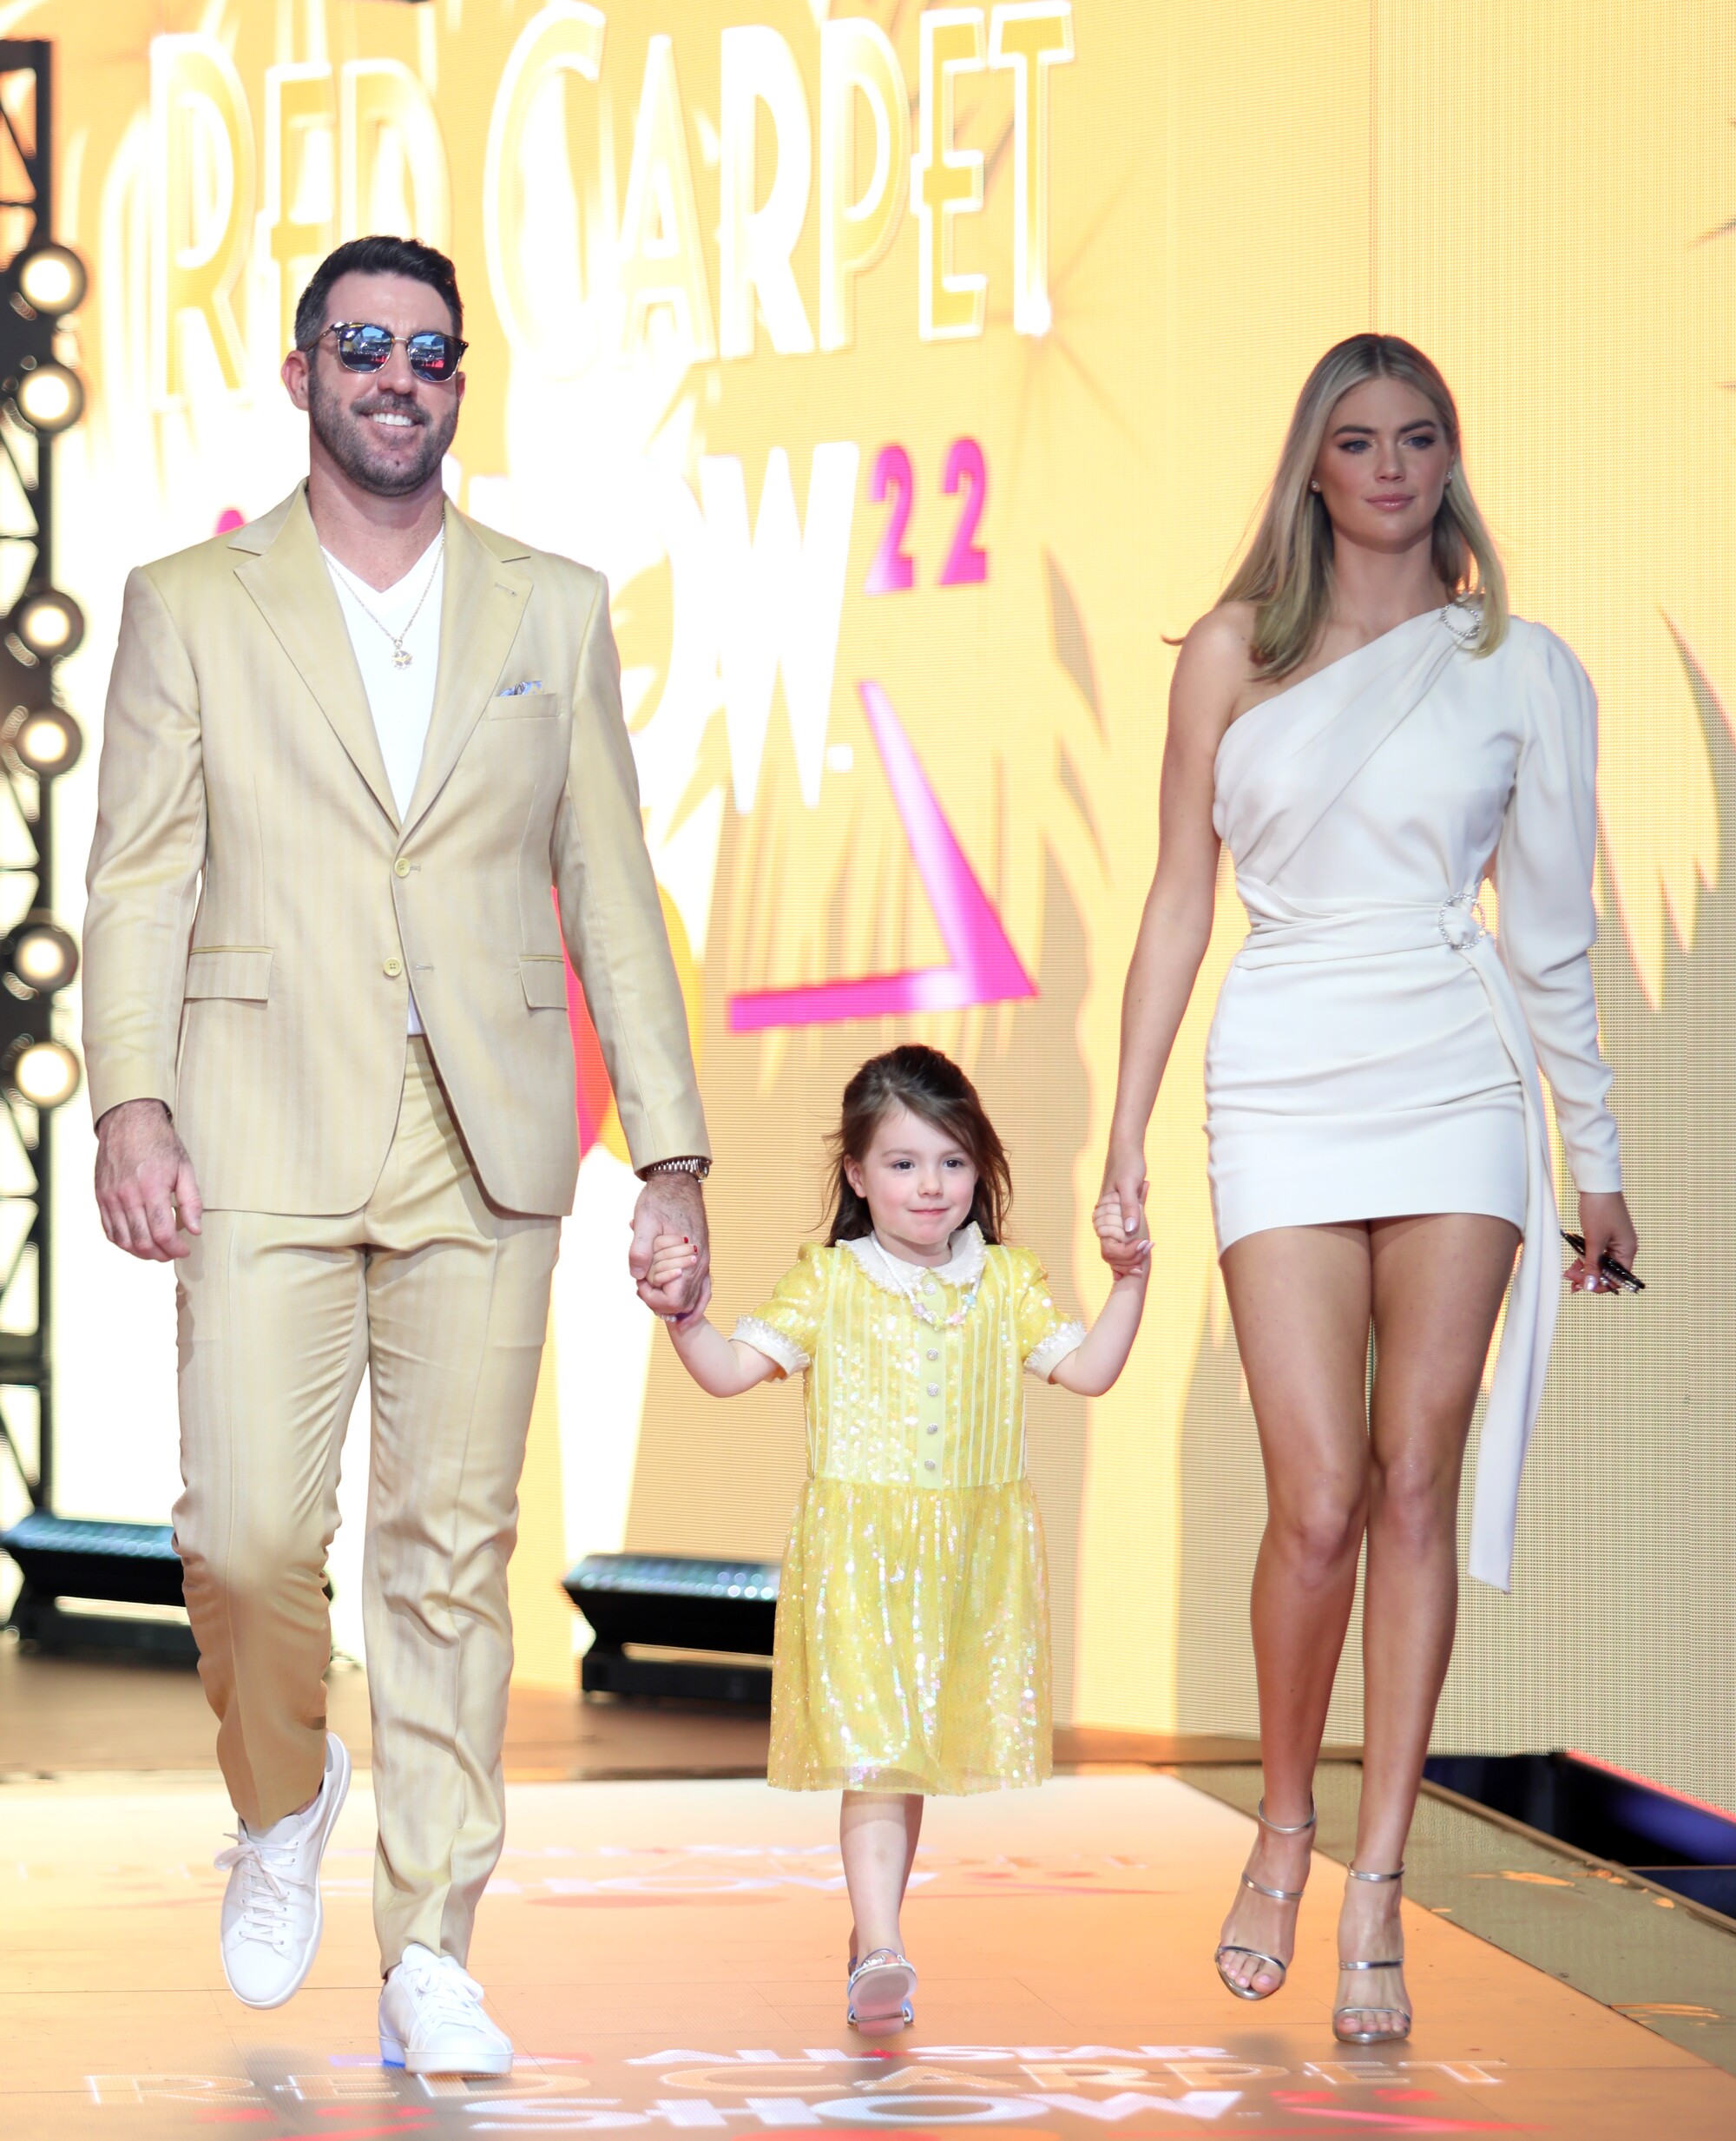 Houston Astros pitcher Justin Verlander, Kate Upton and their daughter arrive at the 2022 MLB All-Star Game Red Carpet Show.